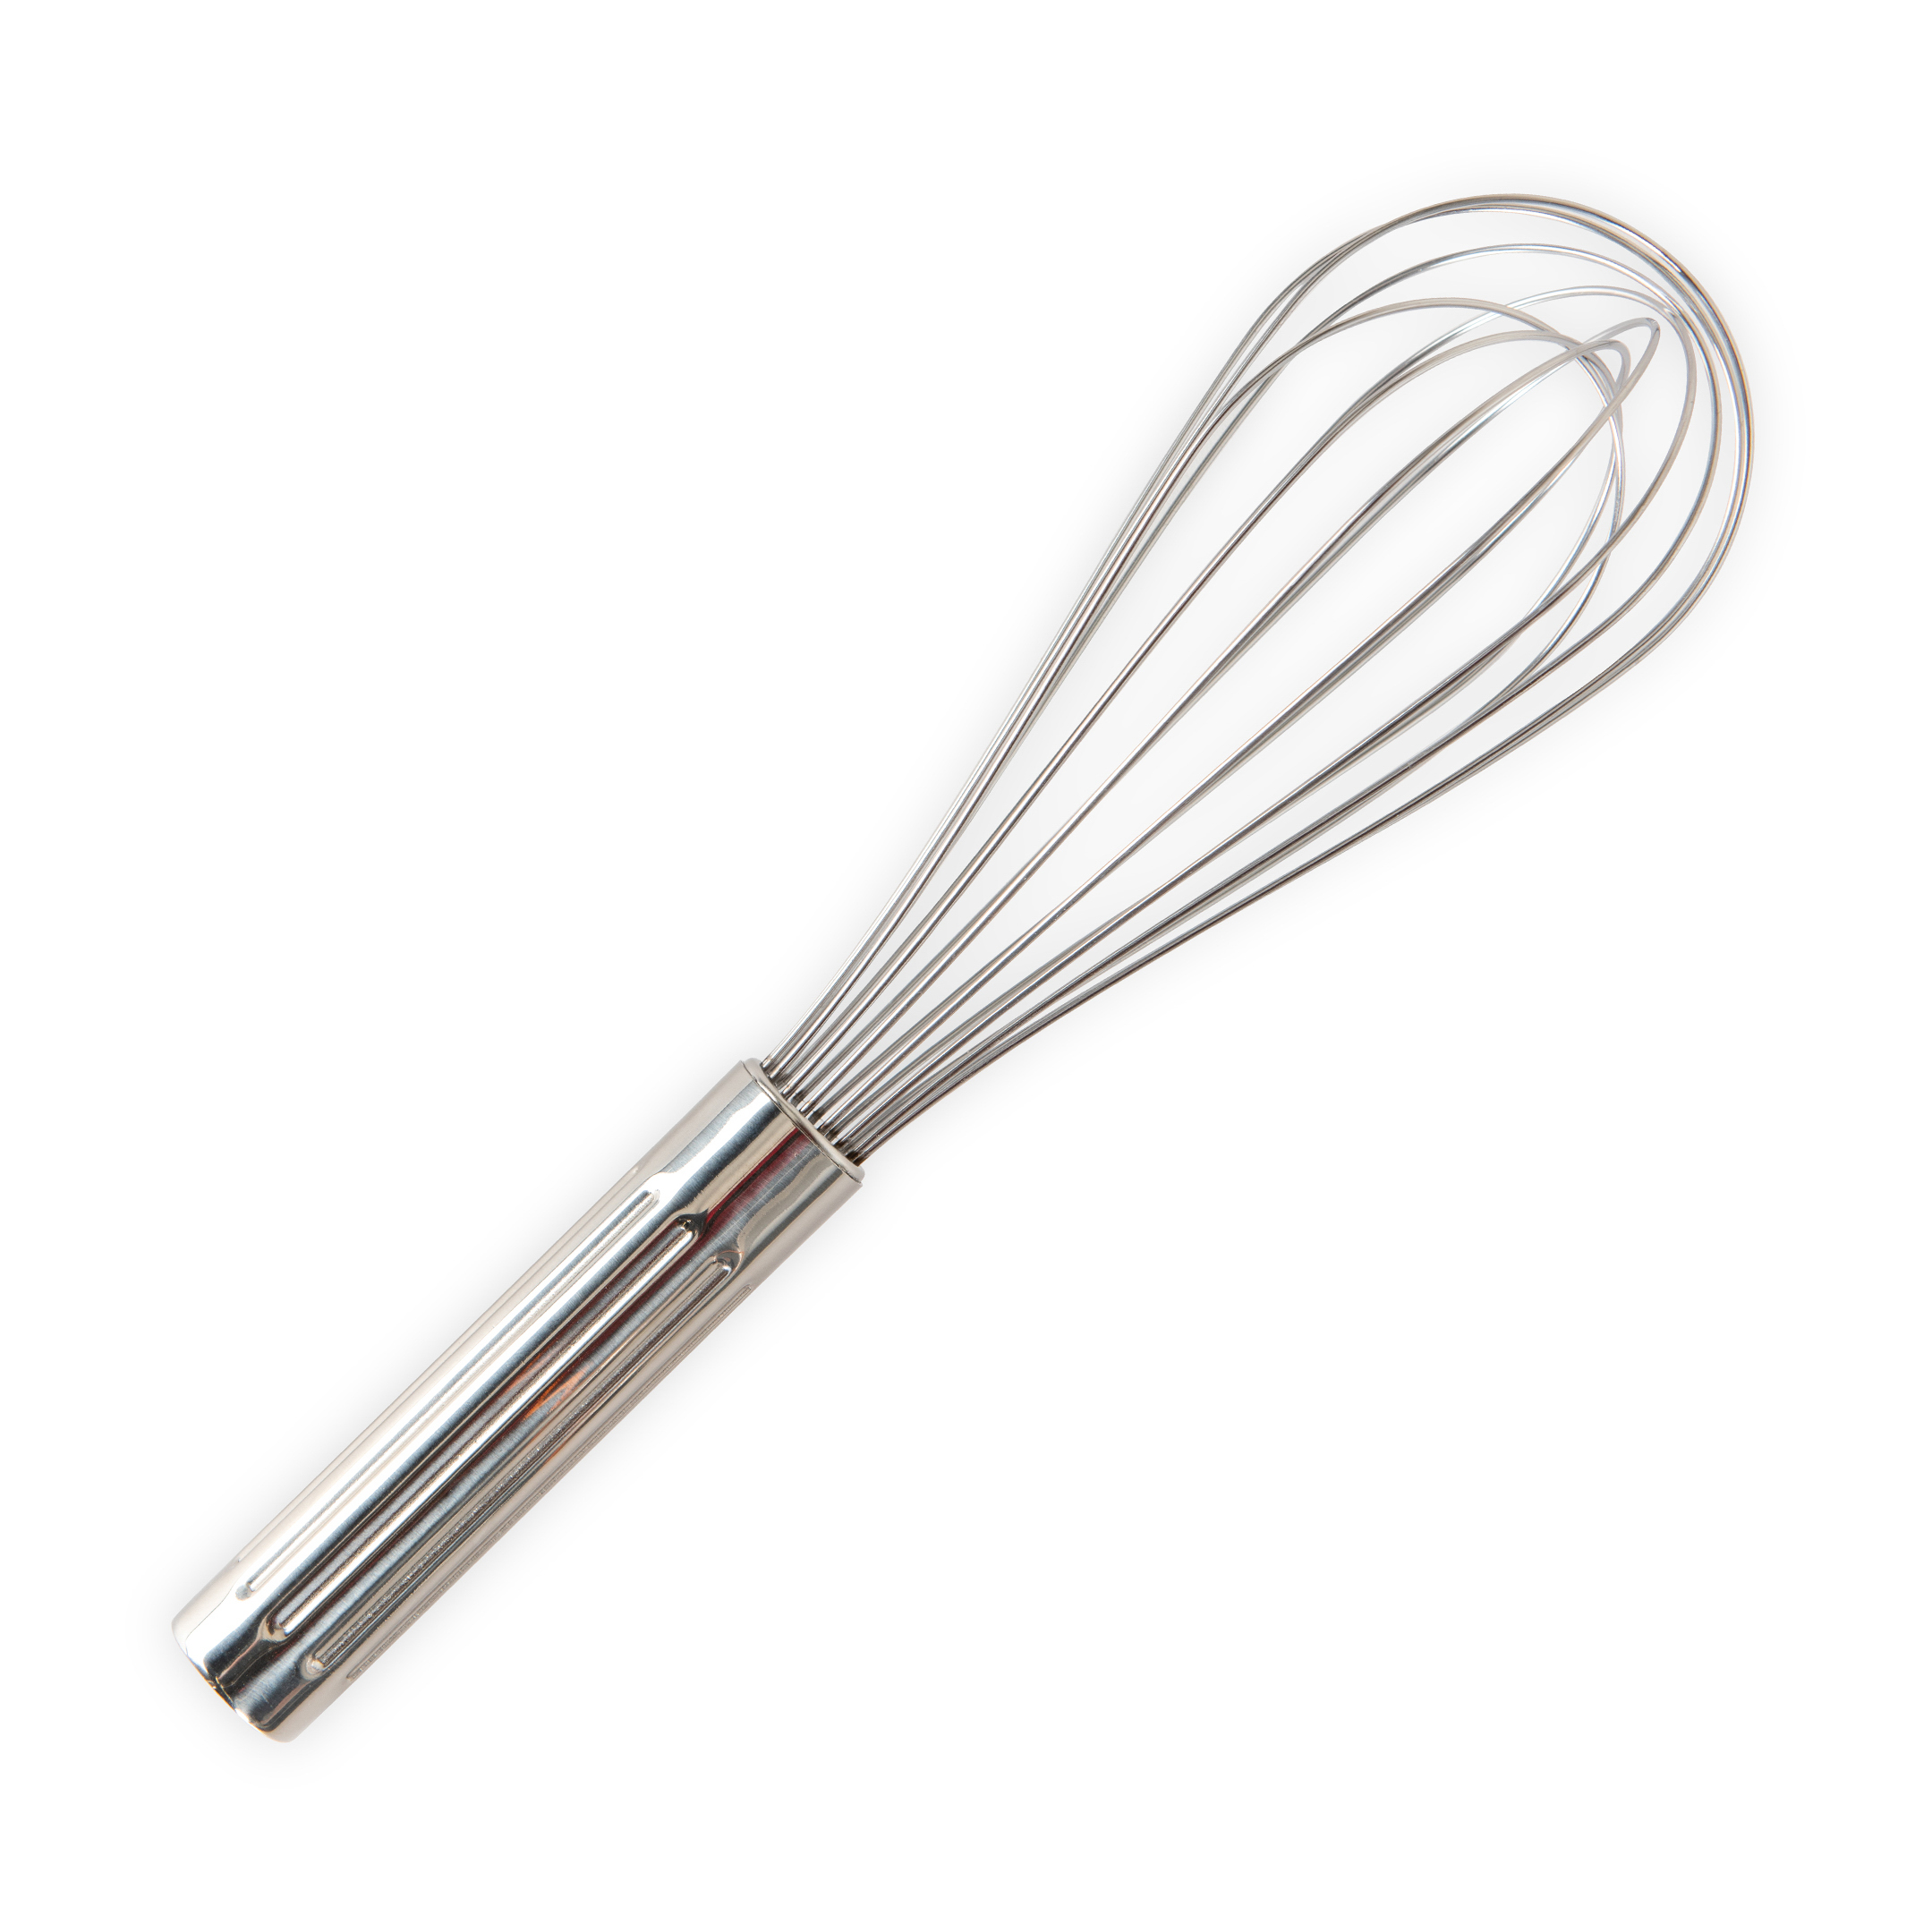 Vogue Heavy Balloon Whisk 505mm - M968 - Buy Online at Nisbets